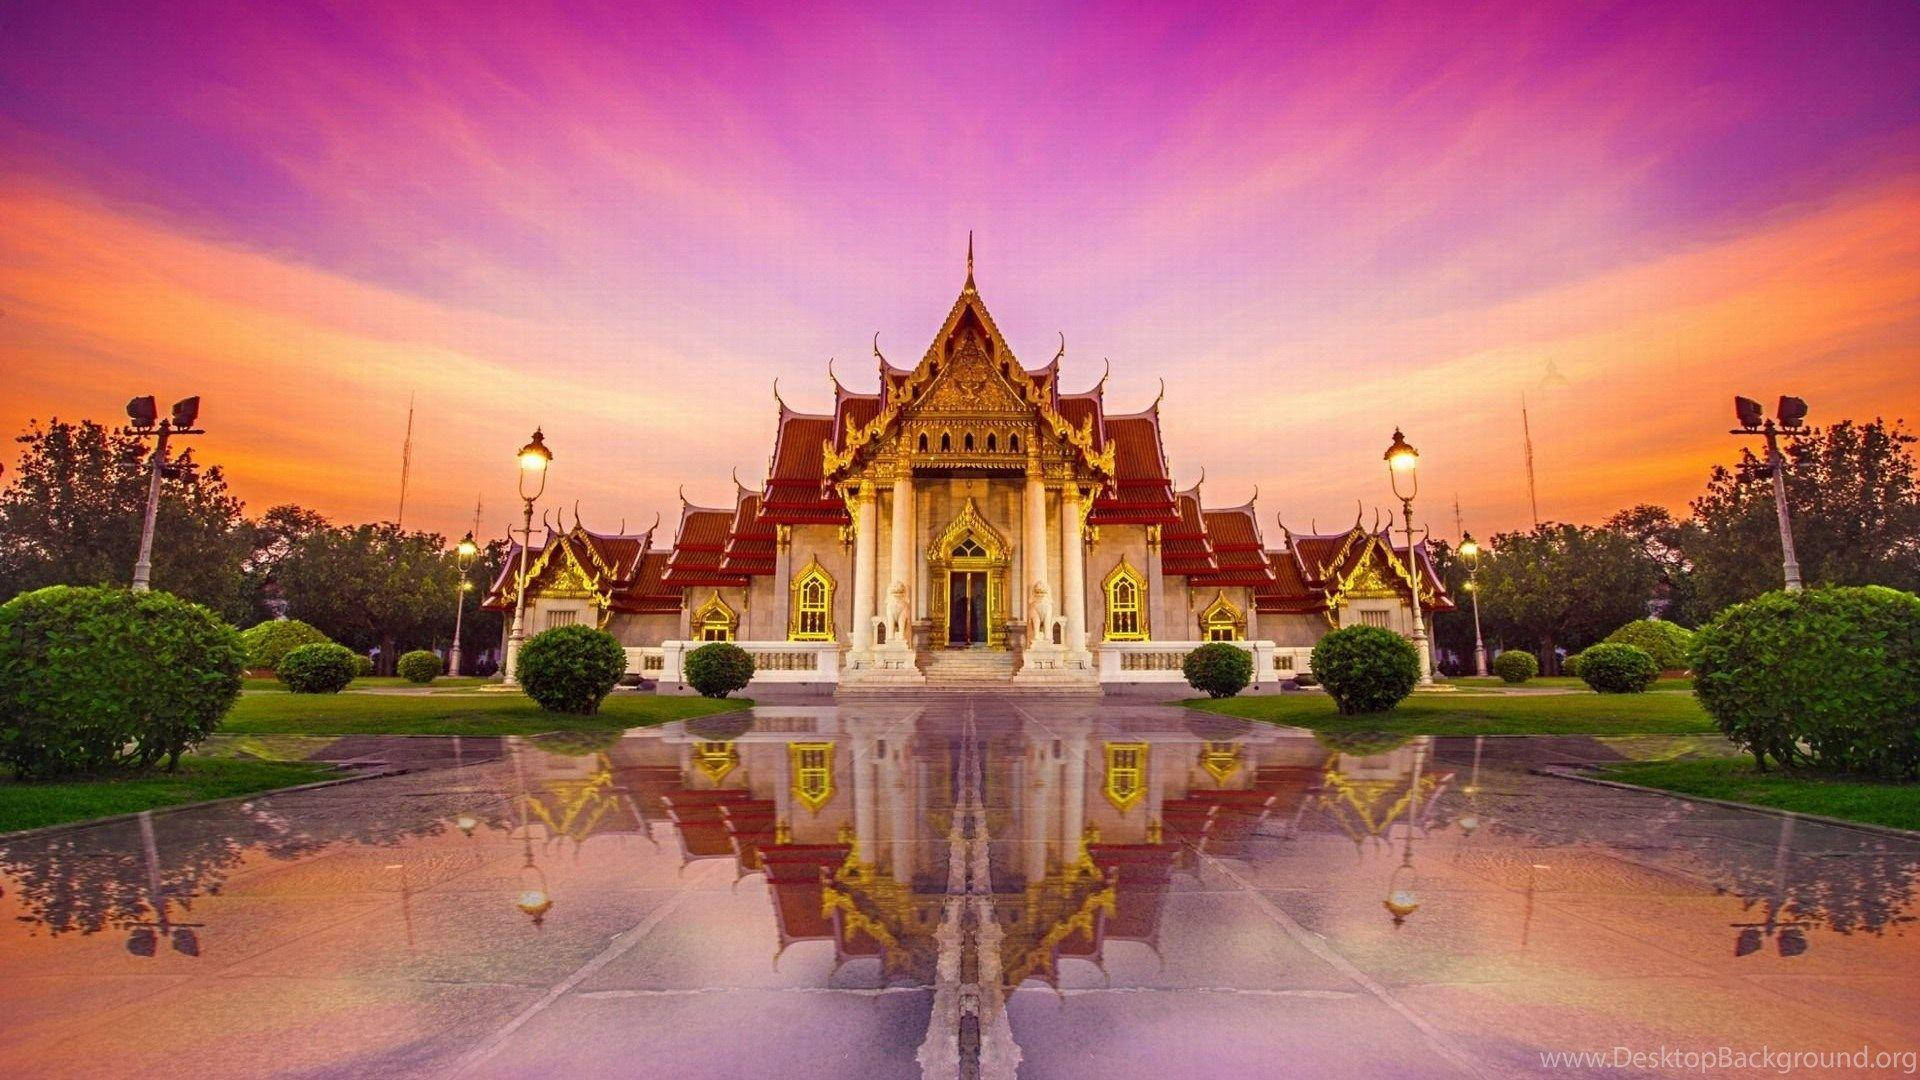 500 Thailand Pictures HD  Download Free Images on Unsplash